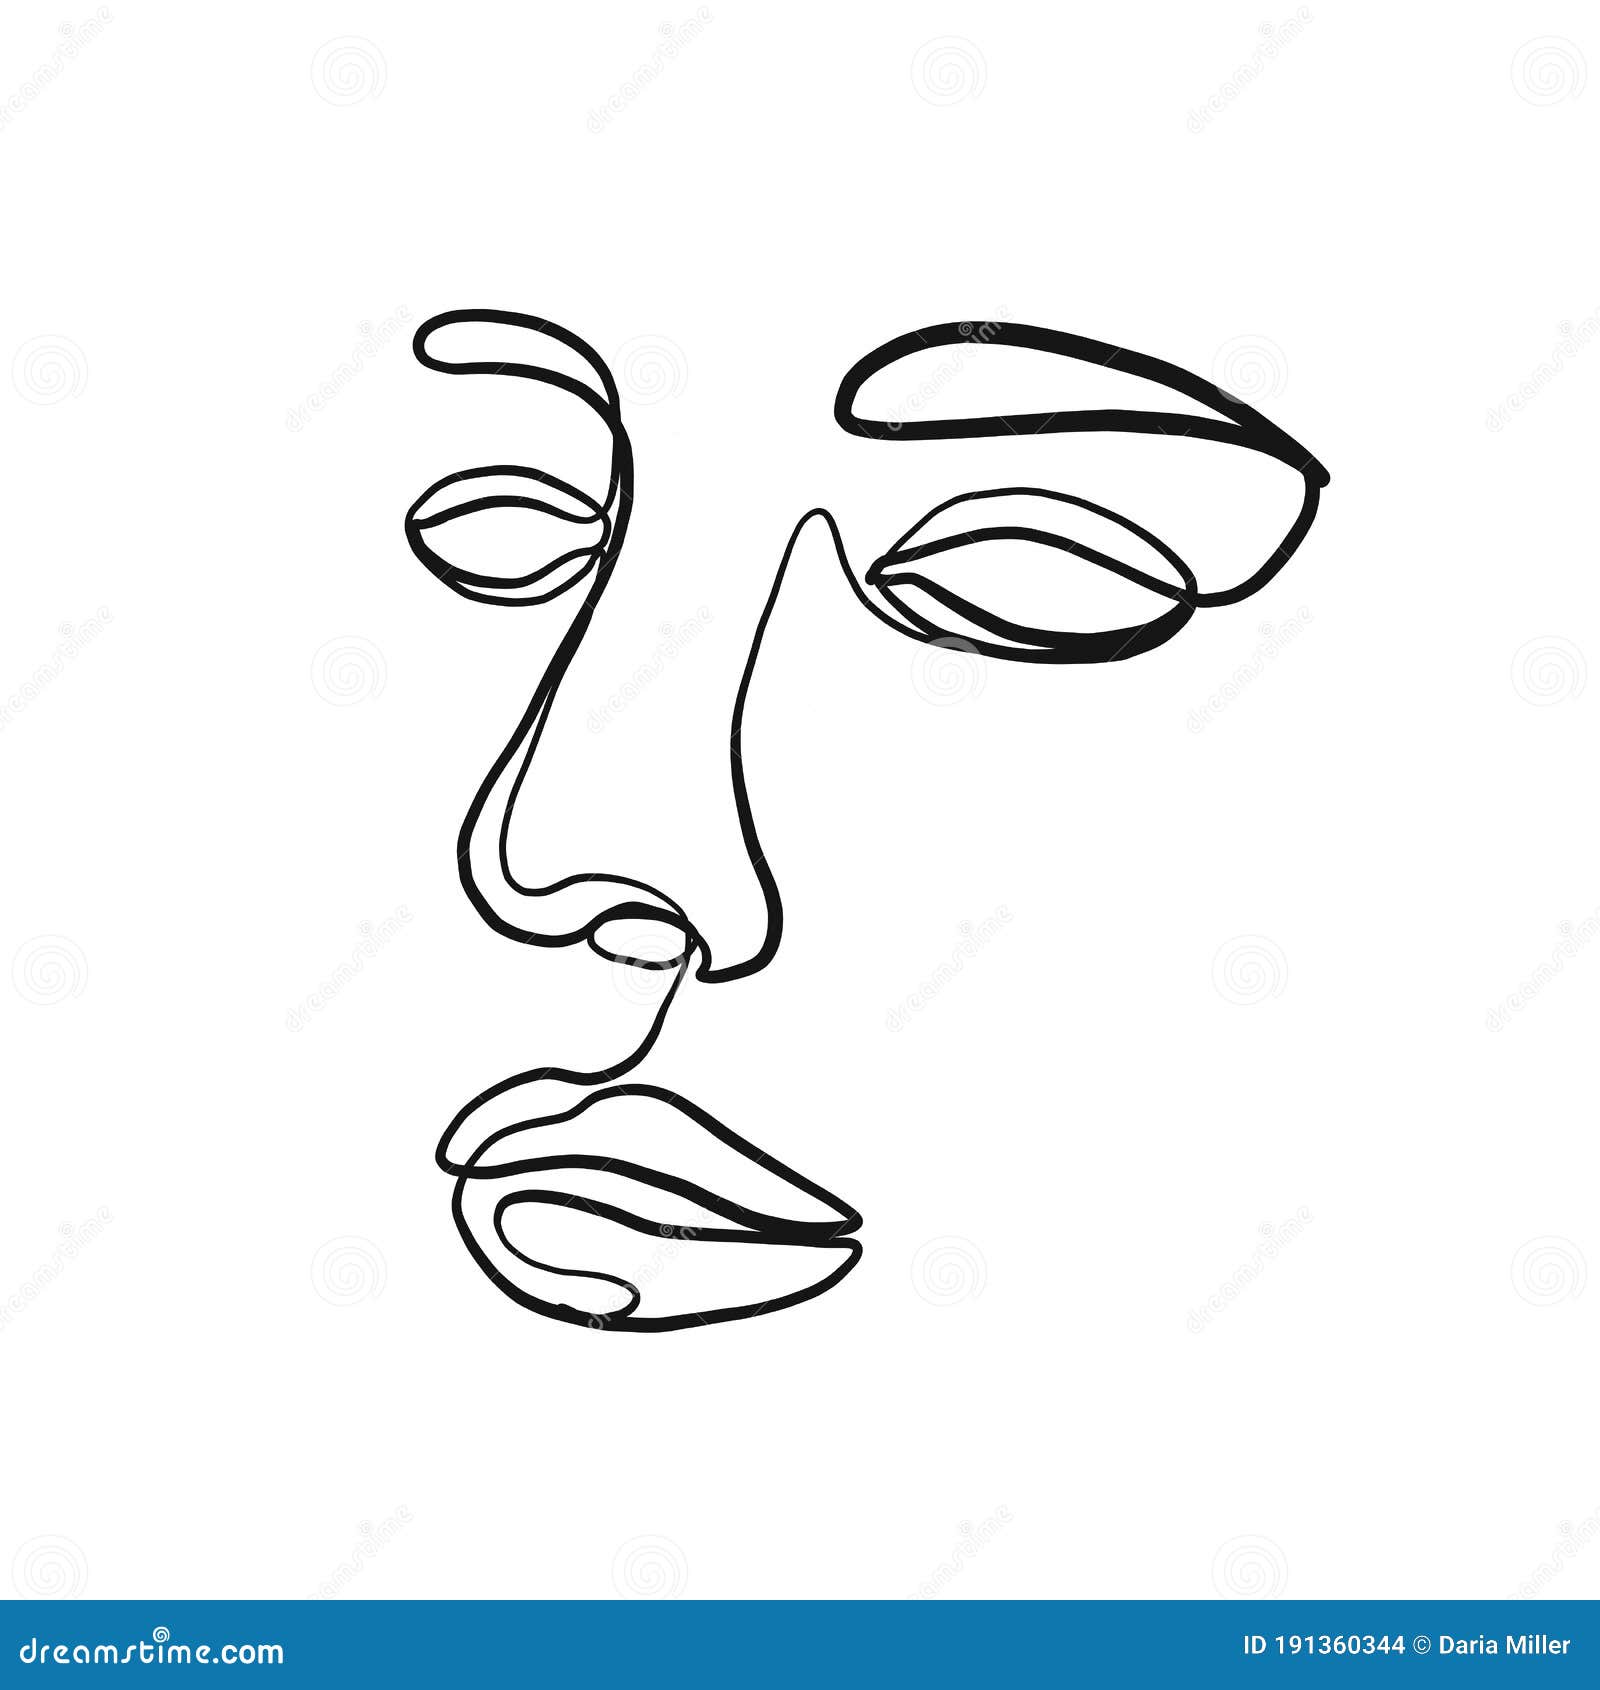 Online Course: Learn to Draw Faces with 4 Simple Shapes from Skillshare |  Class Central